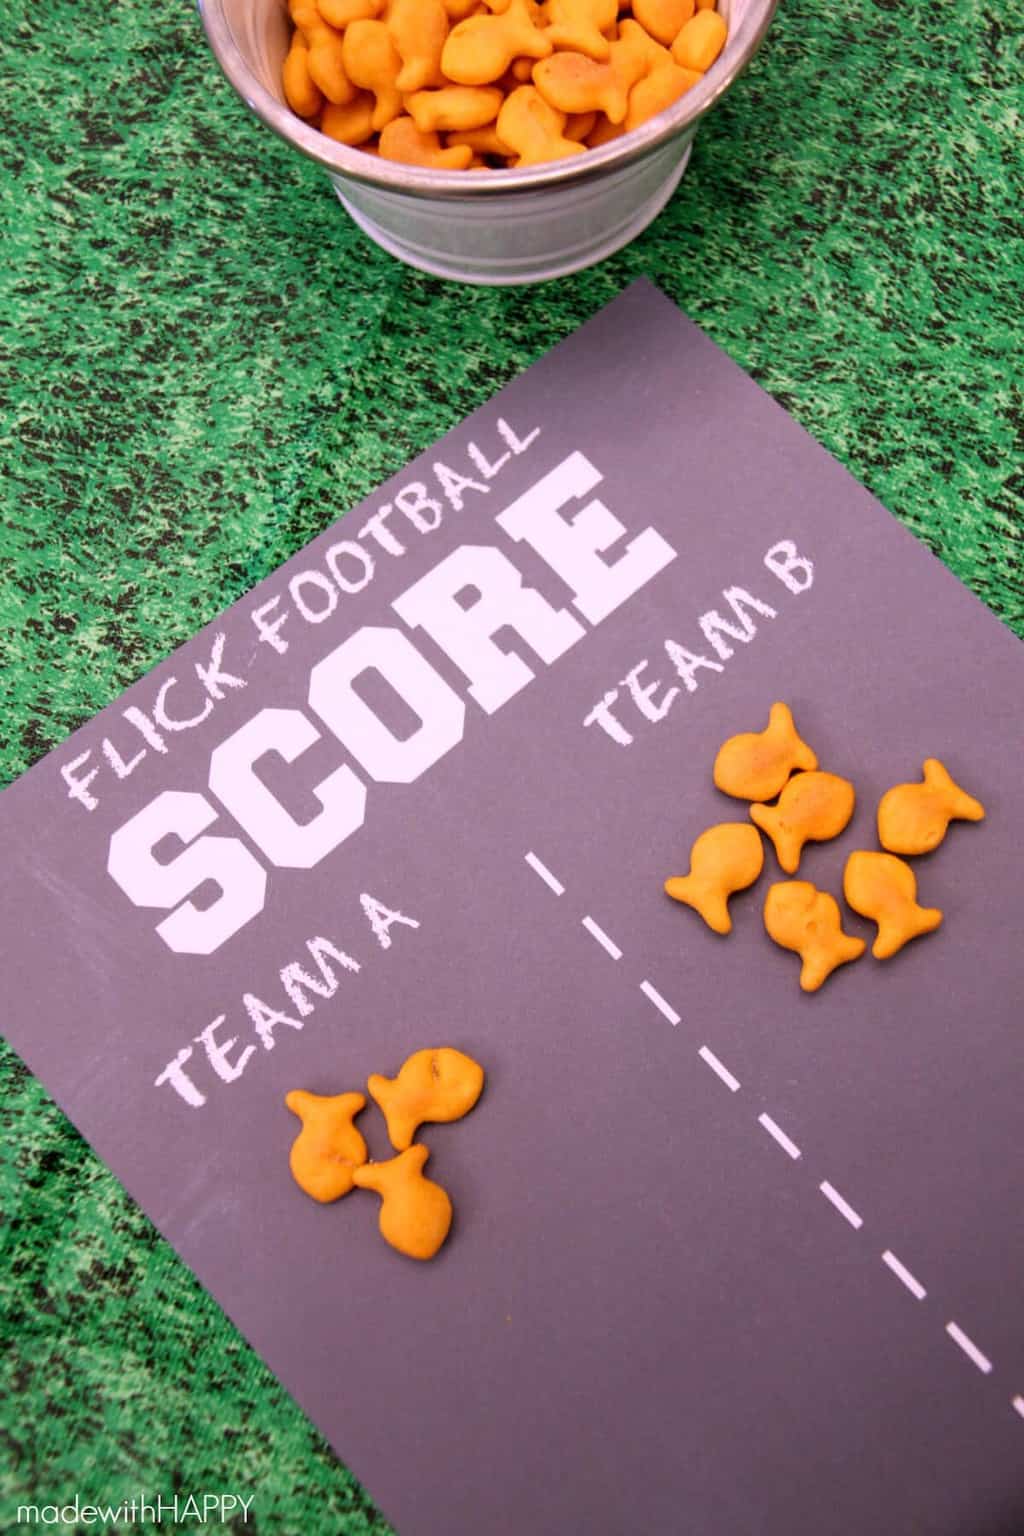 Printable Kids Football Games | Football Fun with Kids | Football Bingo Printables | Football TIC-TAC-TOE | How to make a paper football | www.madewithHAPPY.com